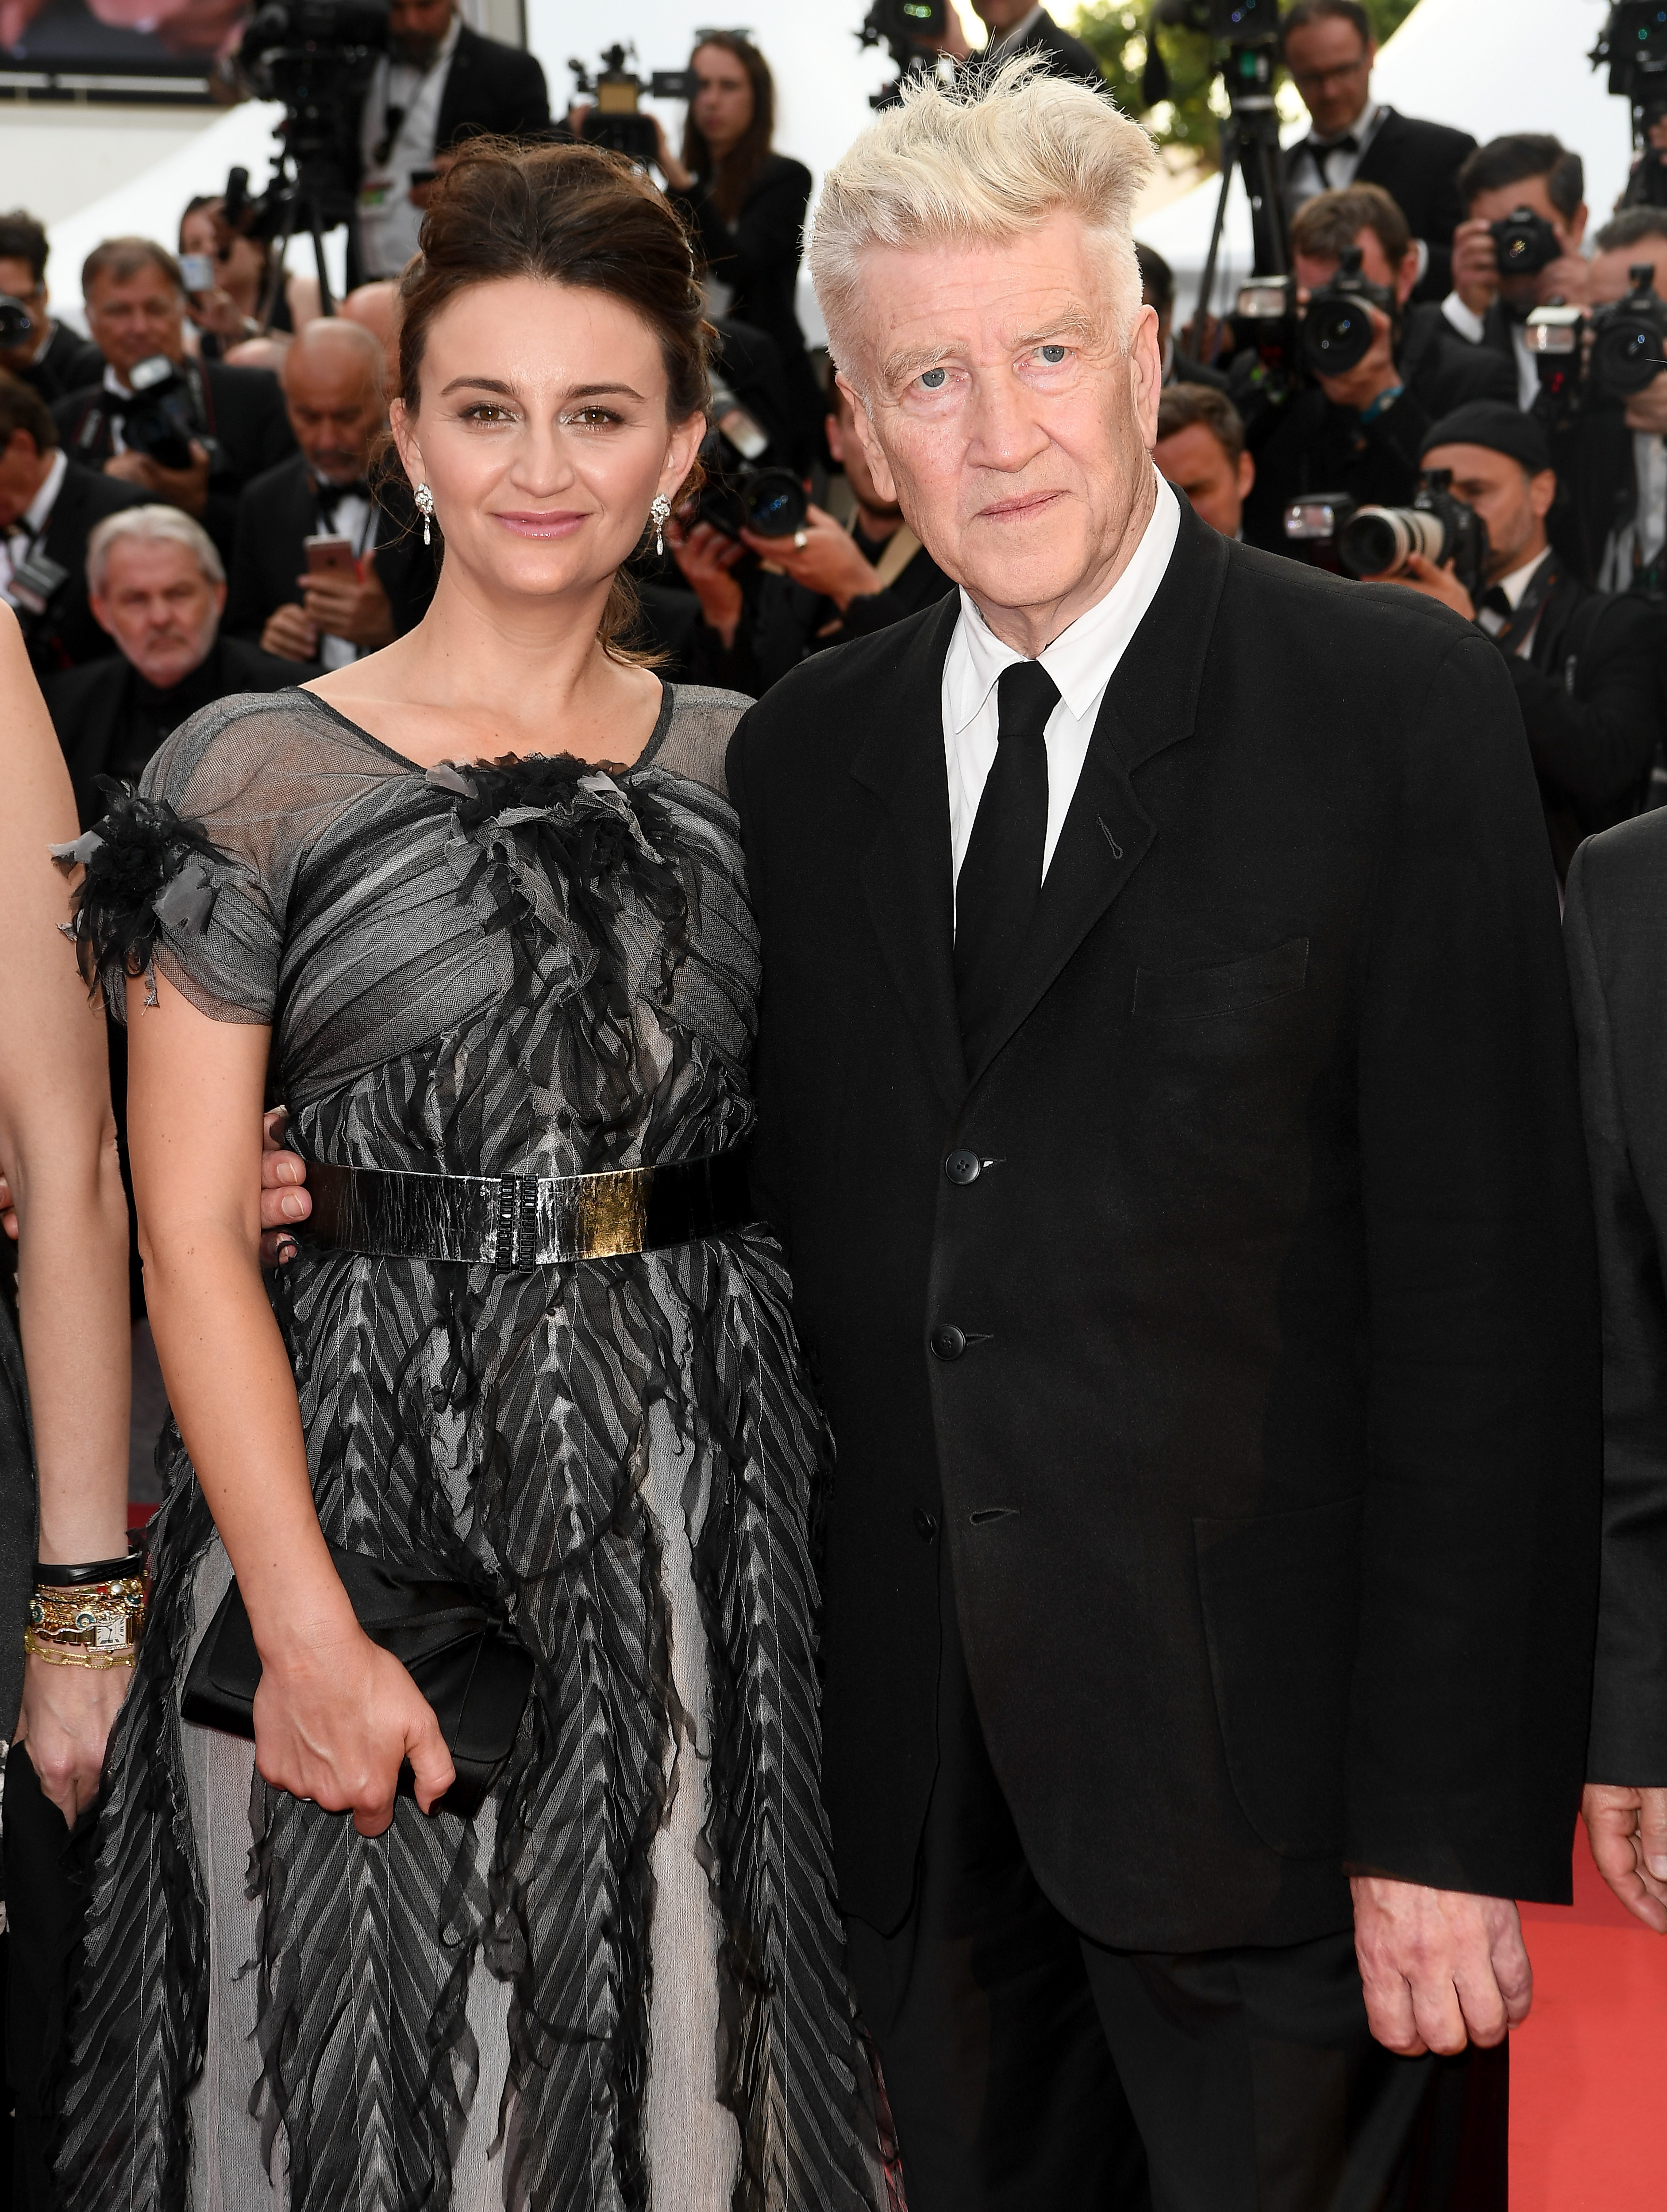 David Lynch and Emily Stofle pictured together at the 2017 Cannes Film Festival